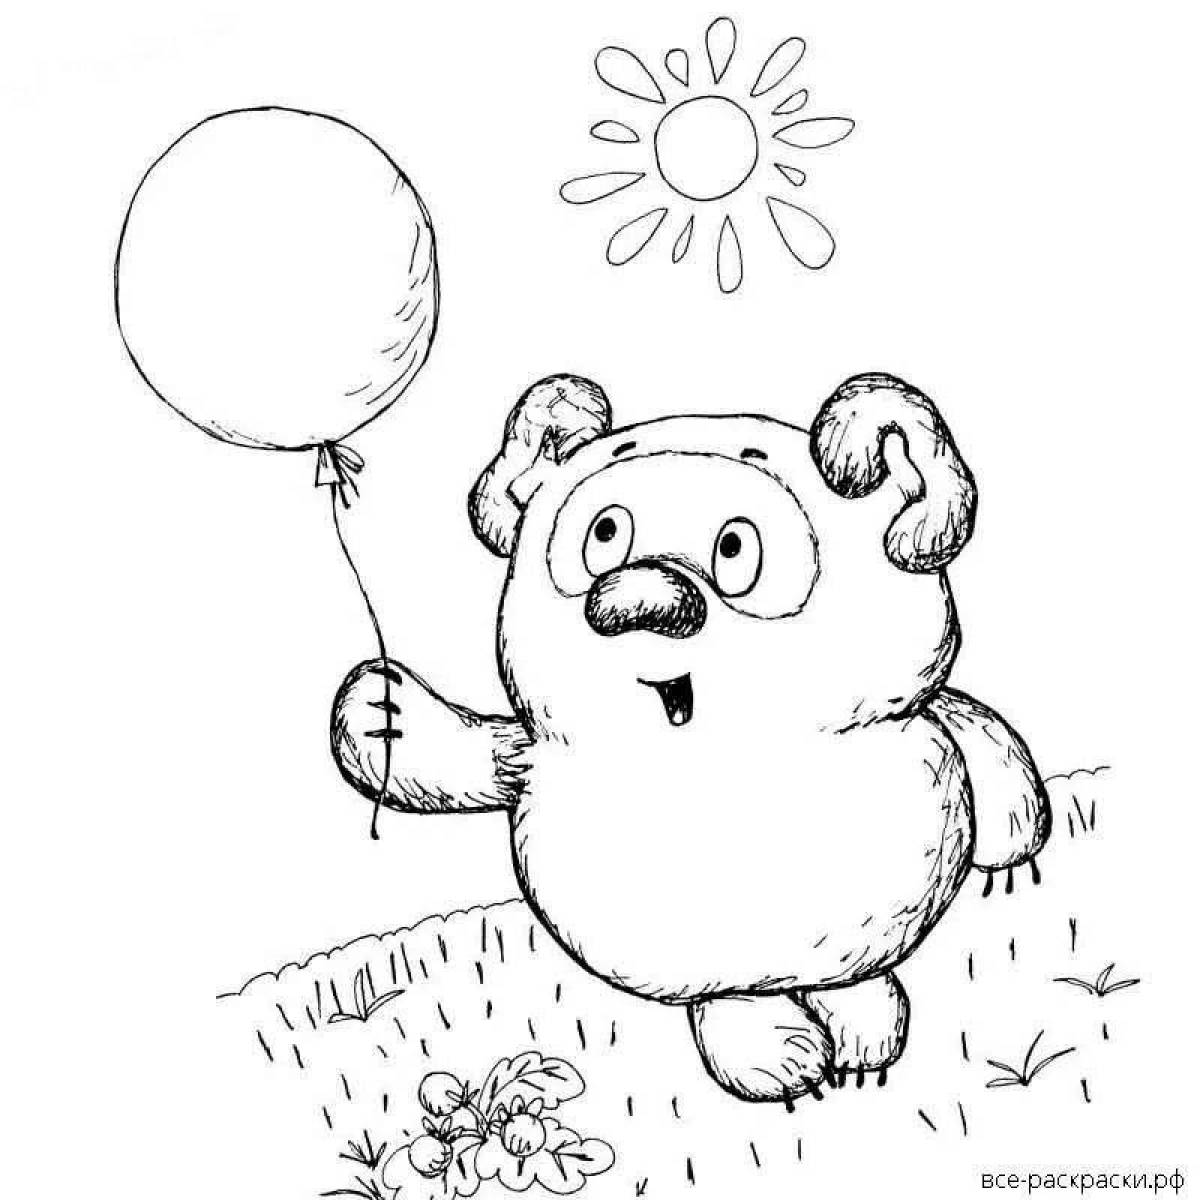 Live bear with balloons